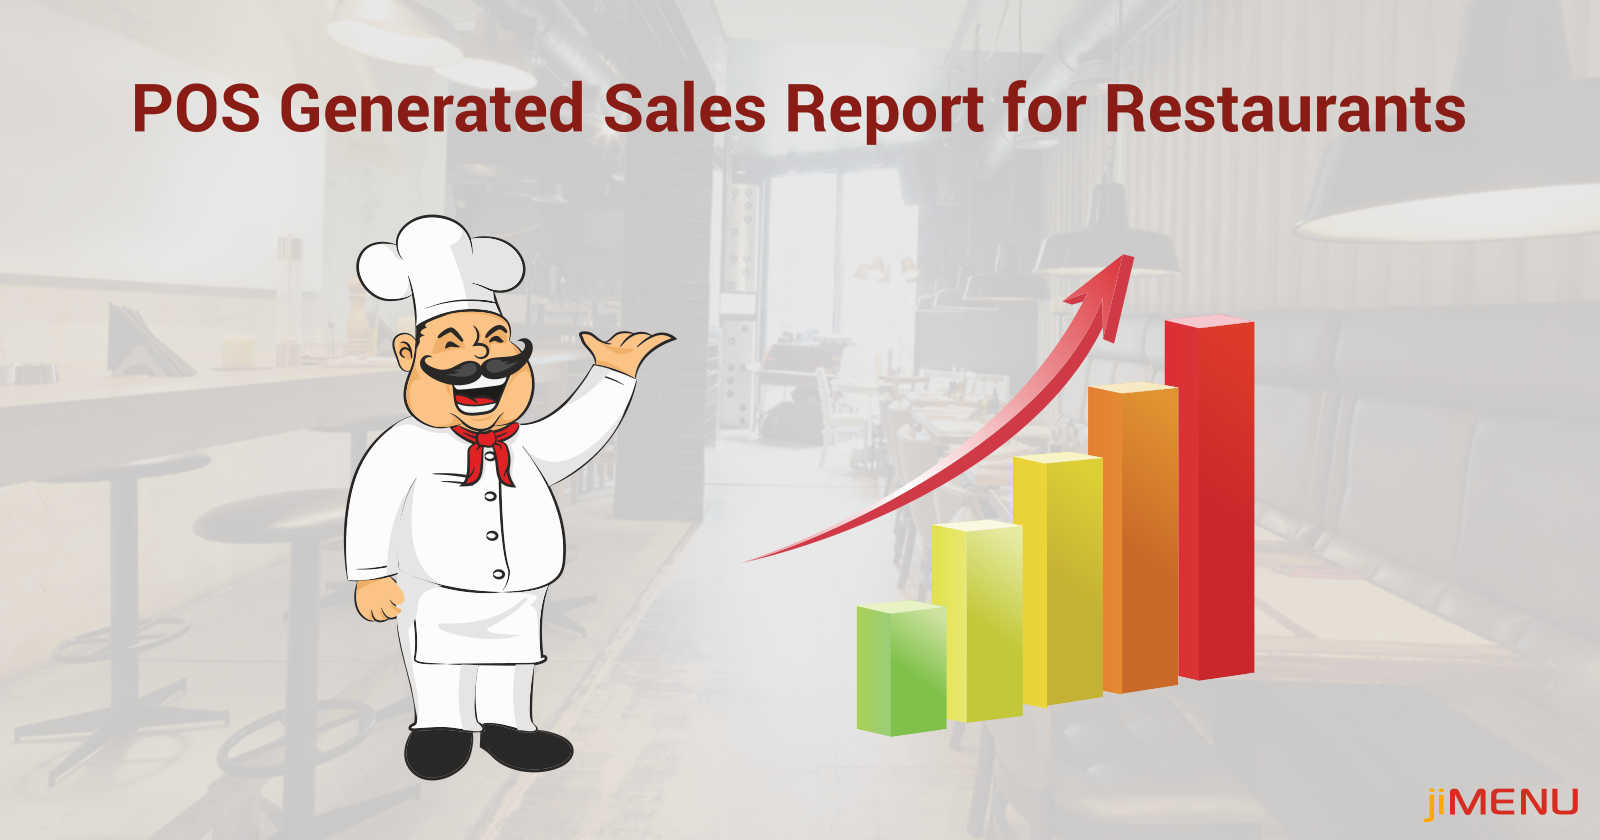 Benefits Of a POS Generated Sales Report